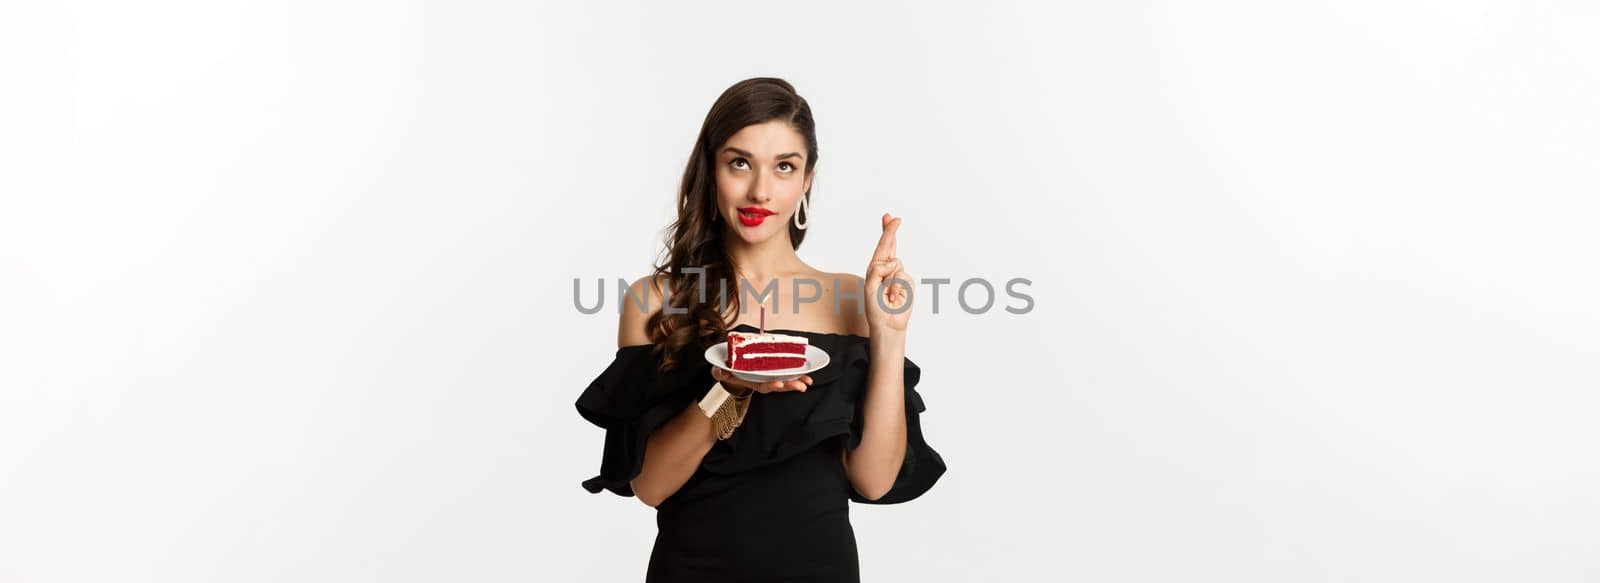 Celebration and party concept. Hopeful and dreamy woman making wish on birthday cake, cross fingers and smiling happy, standing over white background.